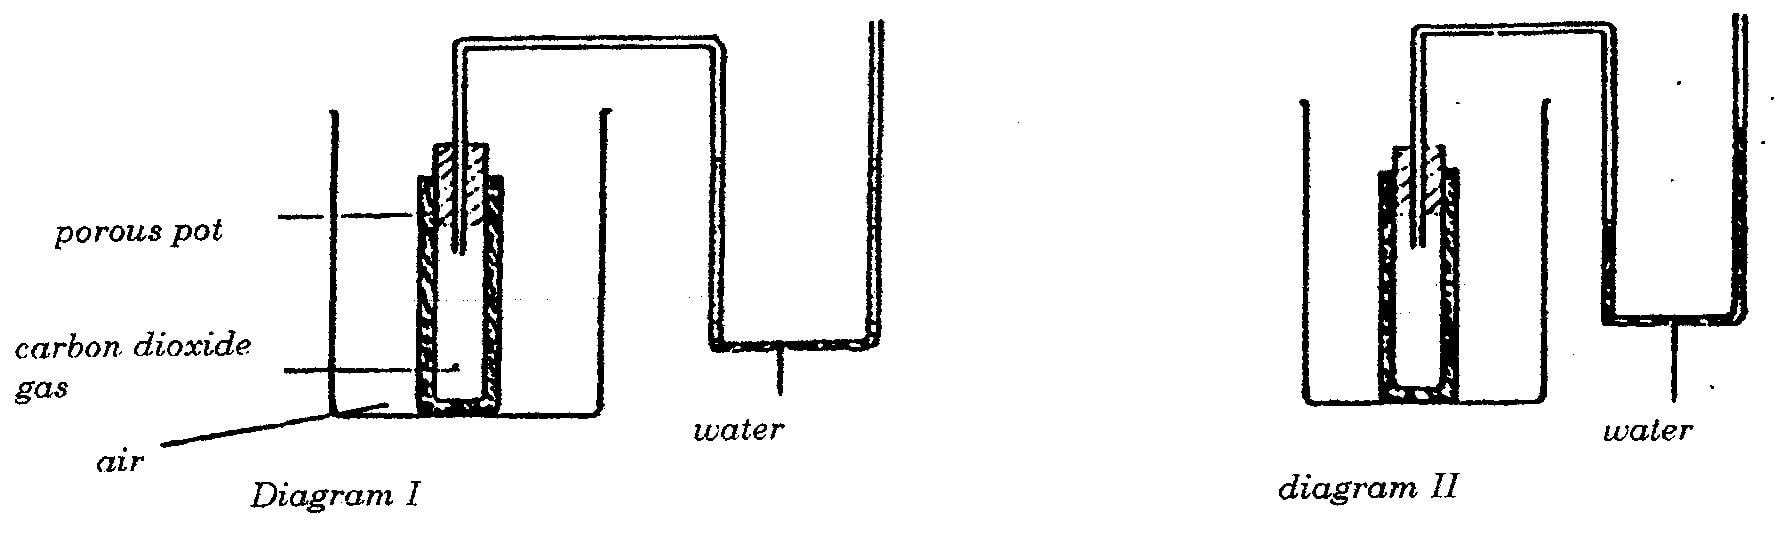 In an experiment to study the diffusion of gases, a student set up the apparatus shown in diagram 1. After sometime the student noticed a change in the water level as shown in the diagram